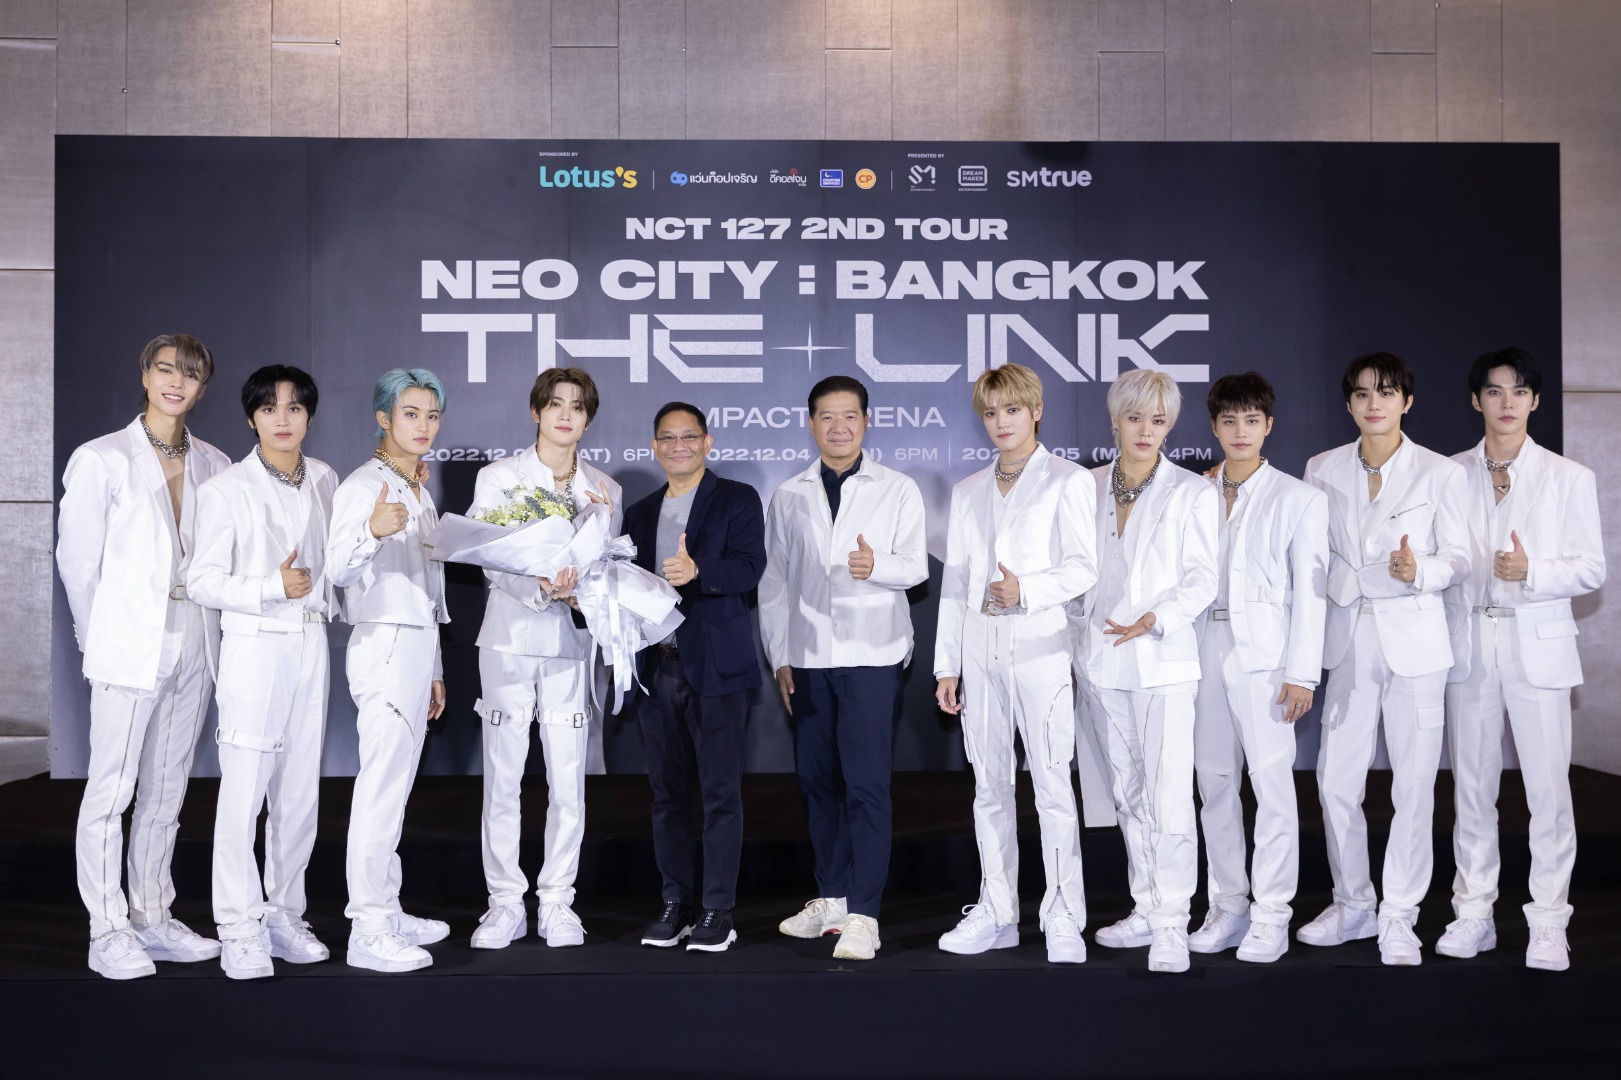 NCT 127 2ND TOUR ‘NEO CITY : BANGKOK – THE LINK’ Press Conference